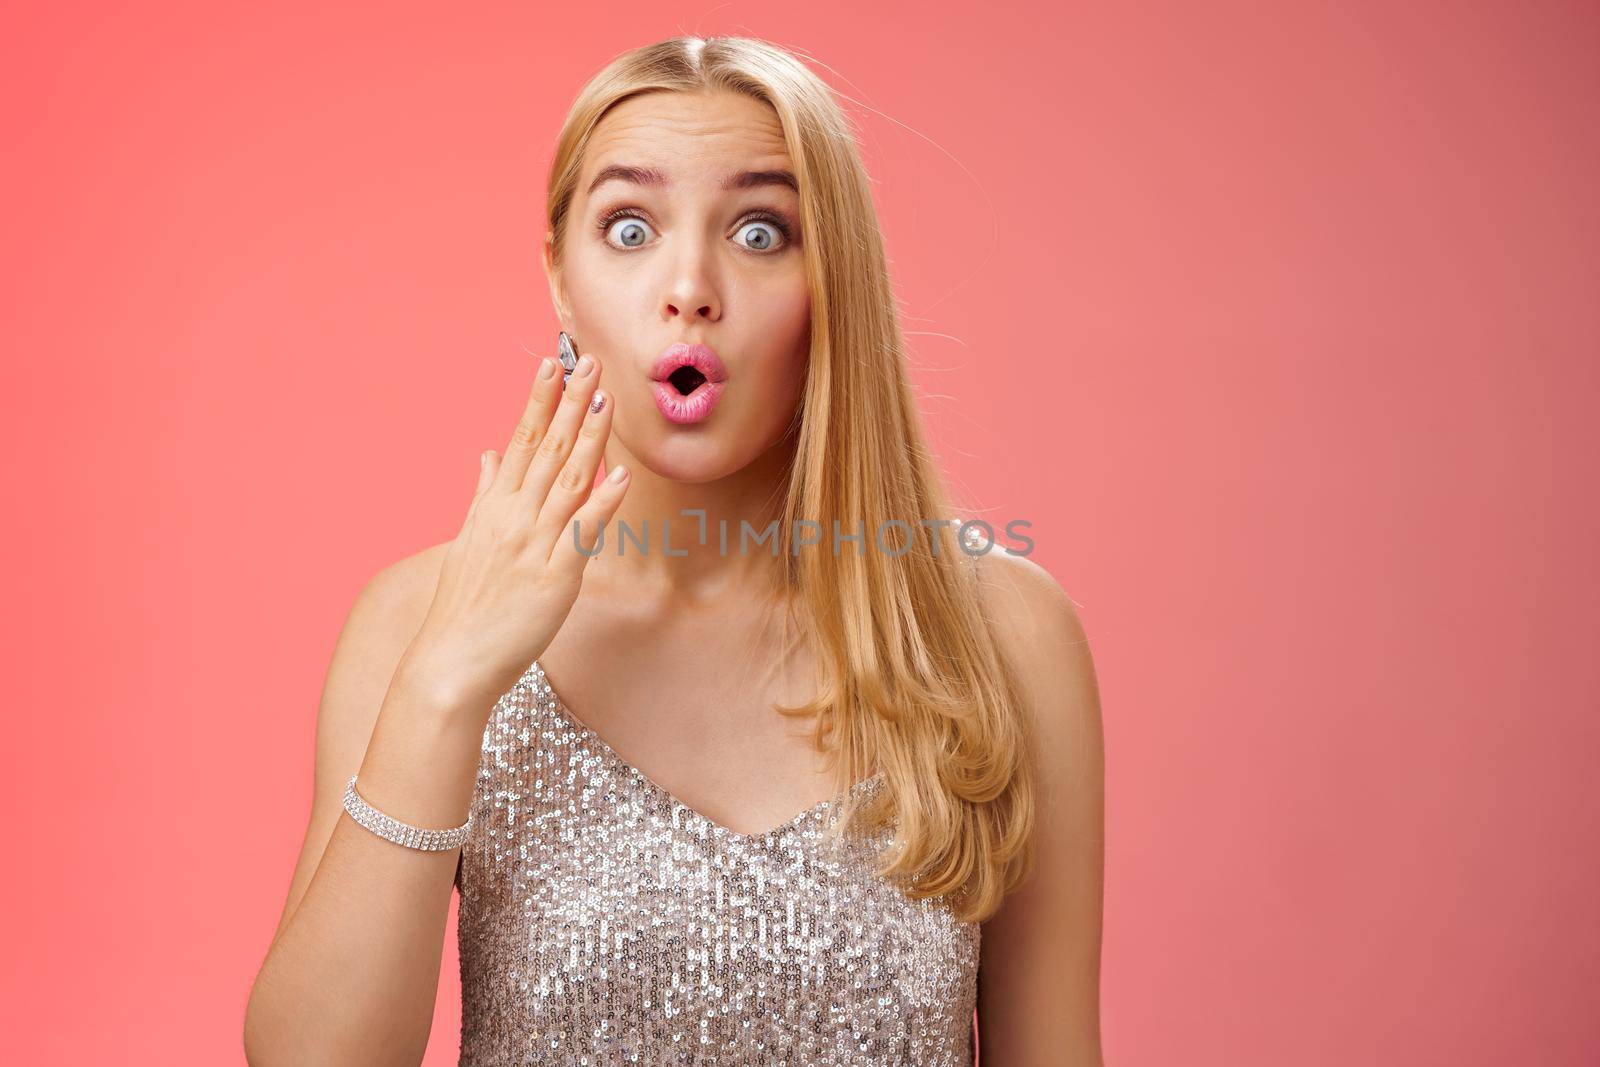 Amused wondered good-looking elegant blonde in silver stylish dress pop eyes surprised folding lips wow cover mouth palm amazement learn incredible rumor gossip with friend, red background.